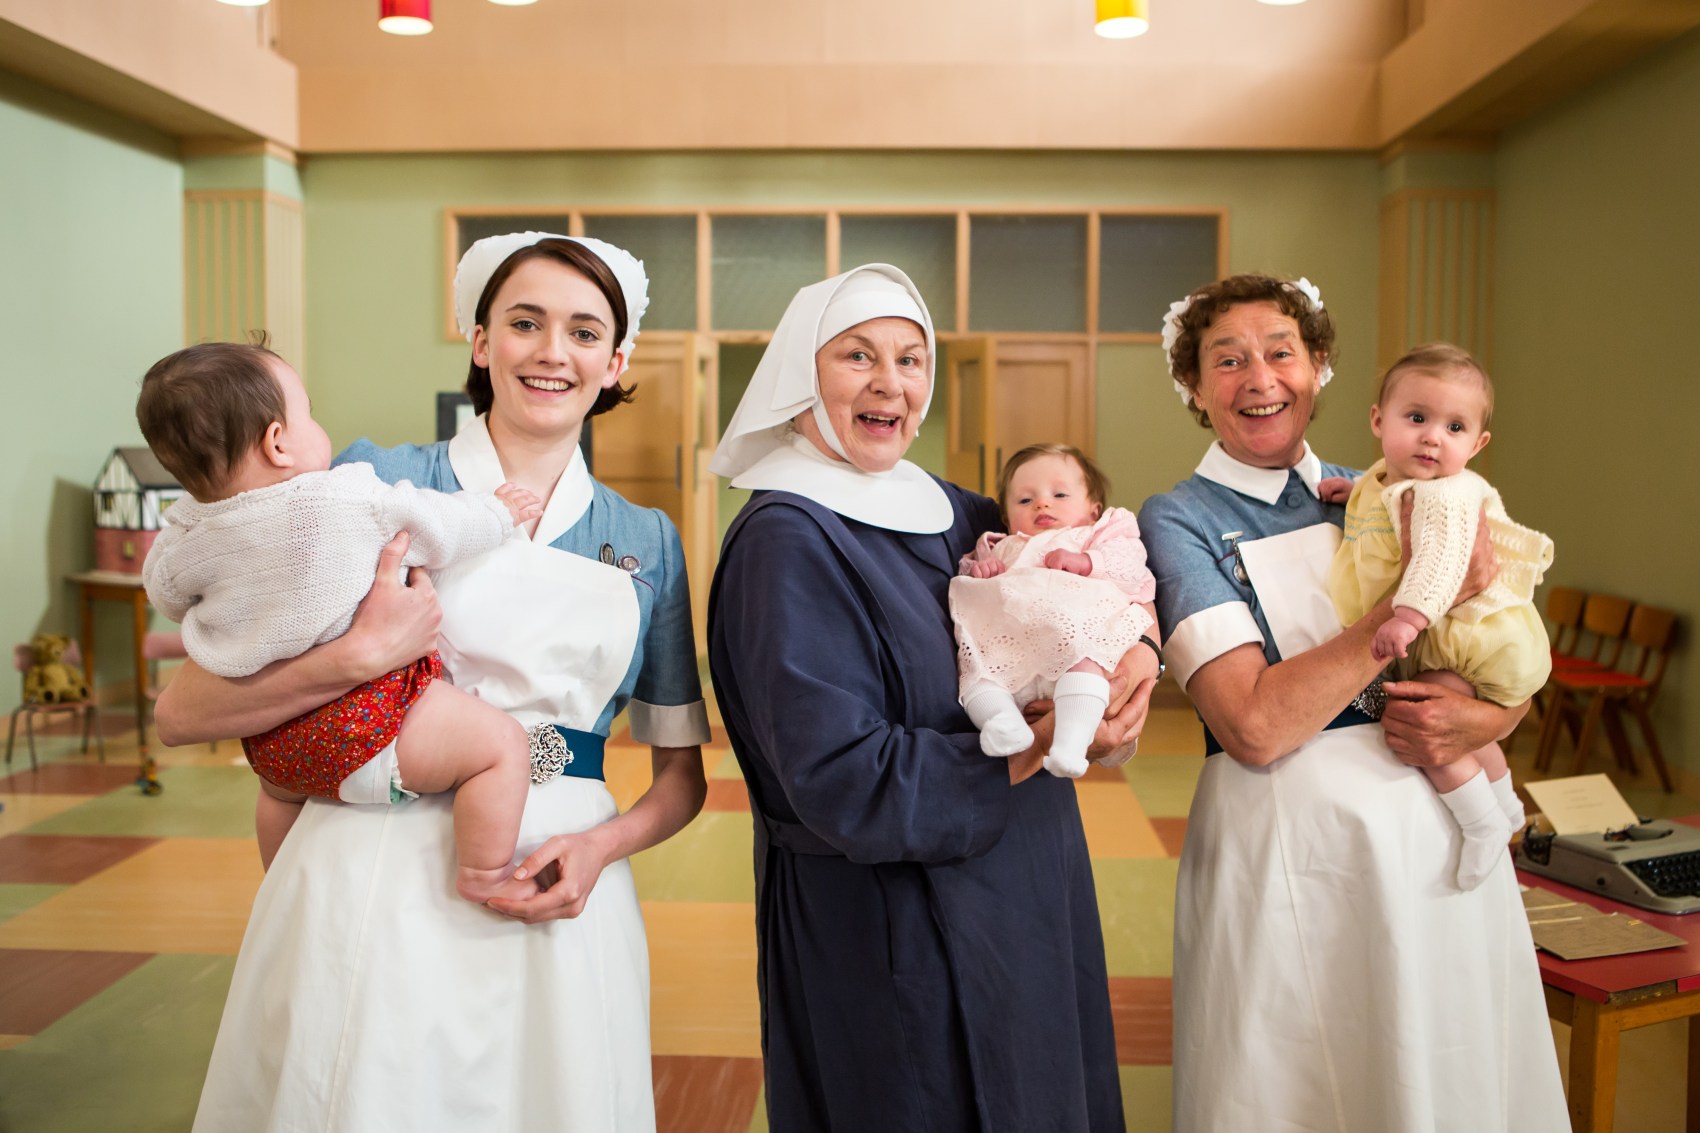 Call the Midwife_S05_EP02
EMBARGOED UNTIL JANUARY 20TH 2016